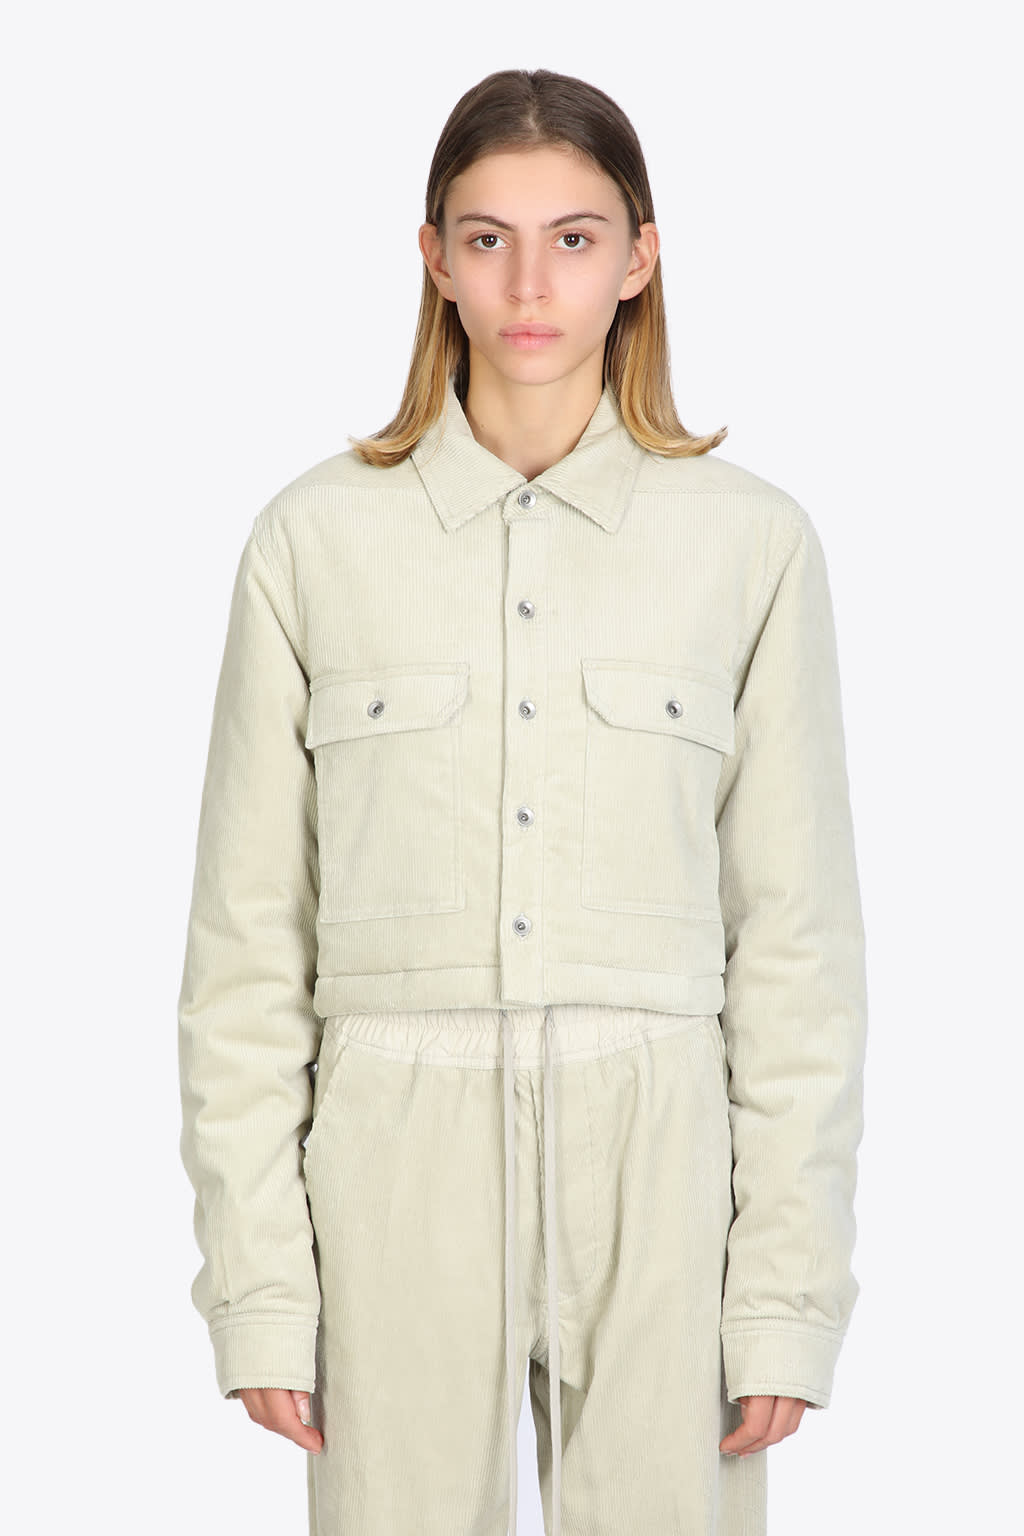 DRKSHDW Cropped Outershirt Light grey corduroy cropped jacket - Cropped outershirt